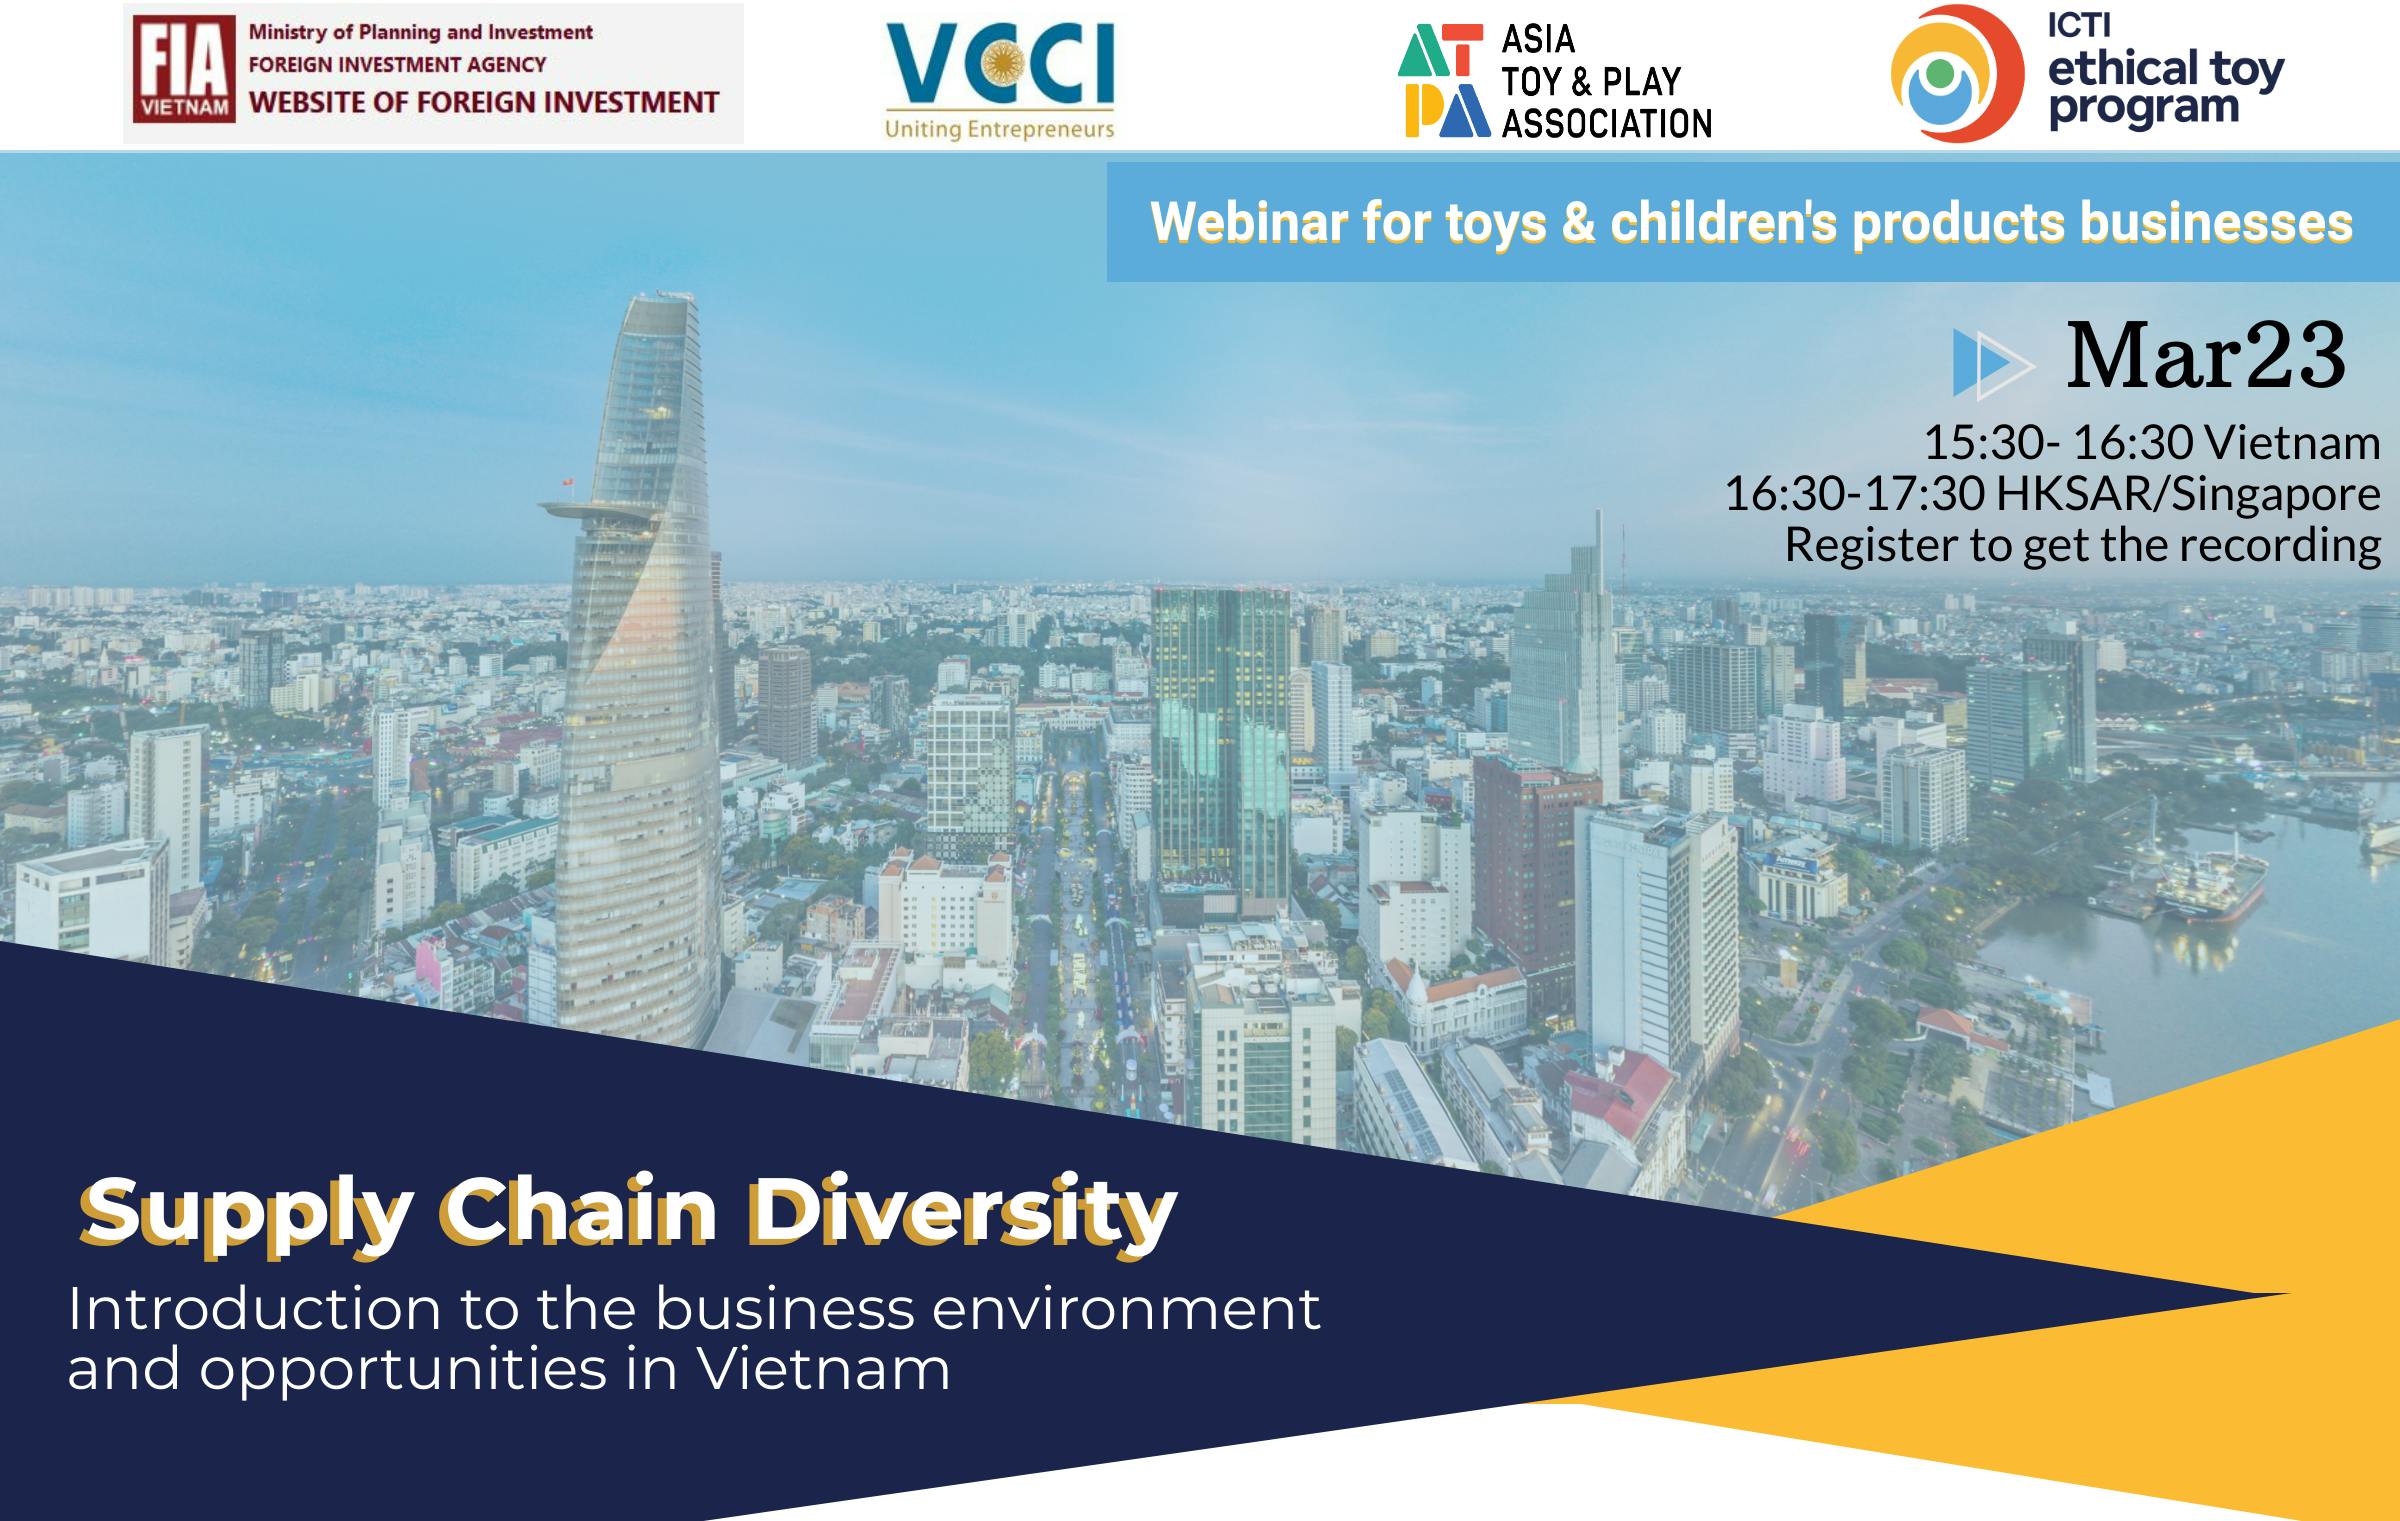  Supply Chain Diversity - Introduction to the business environment and opportunities in Vietnam